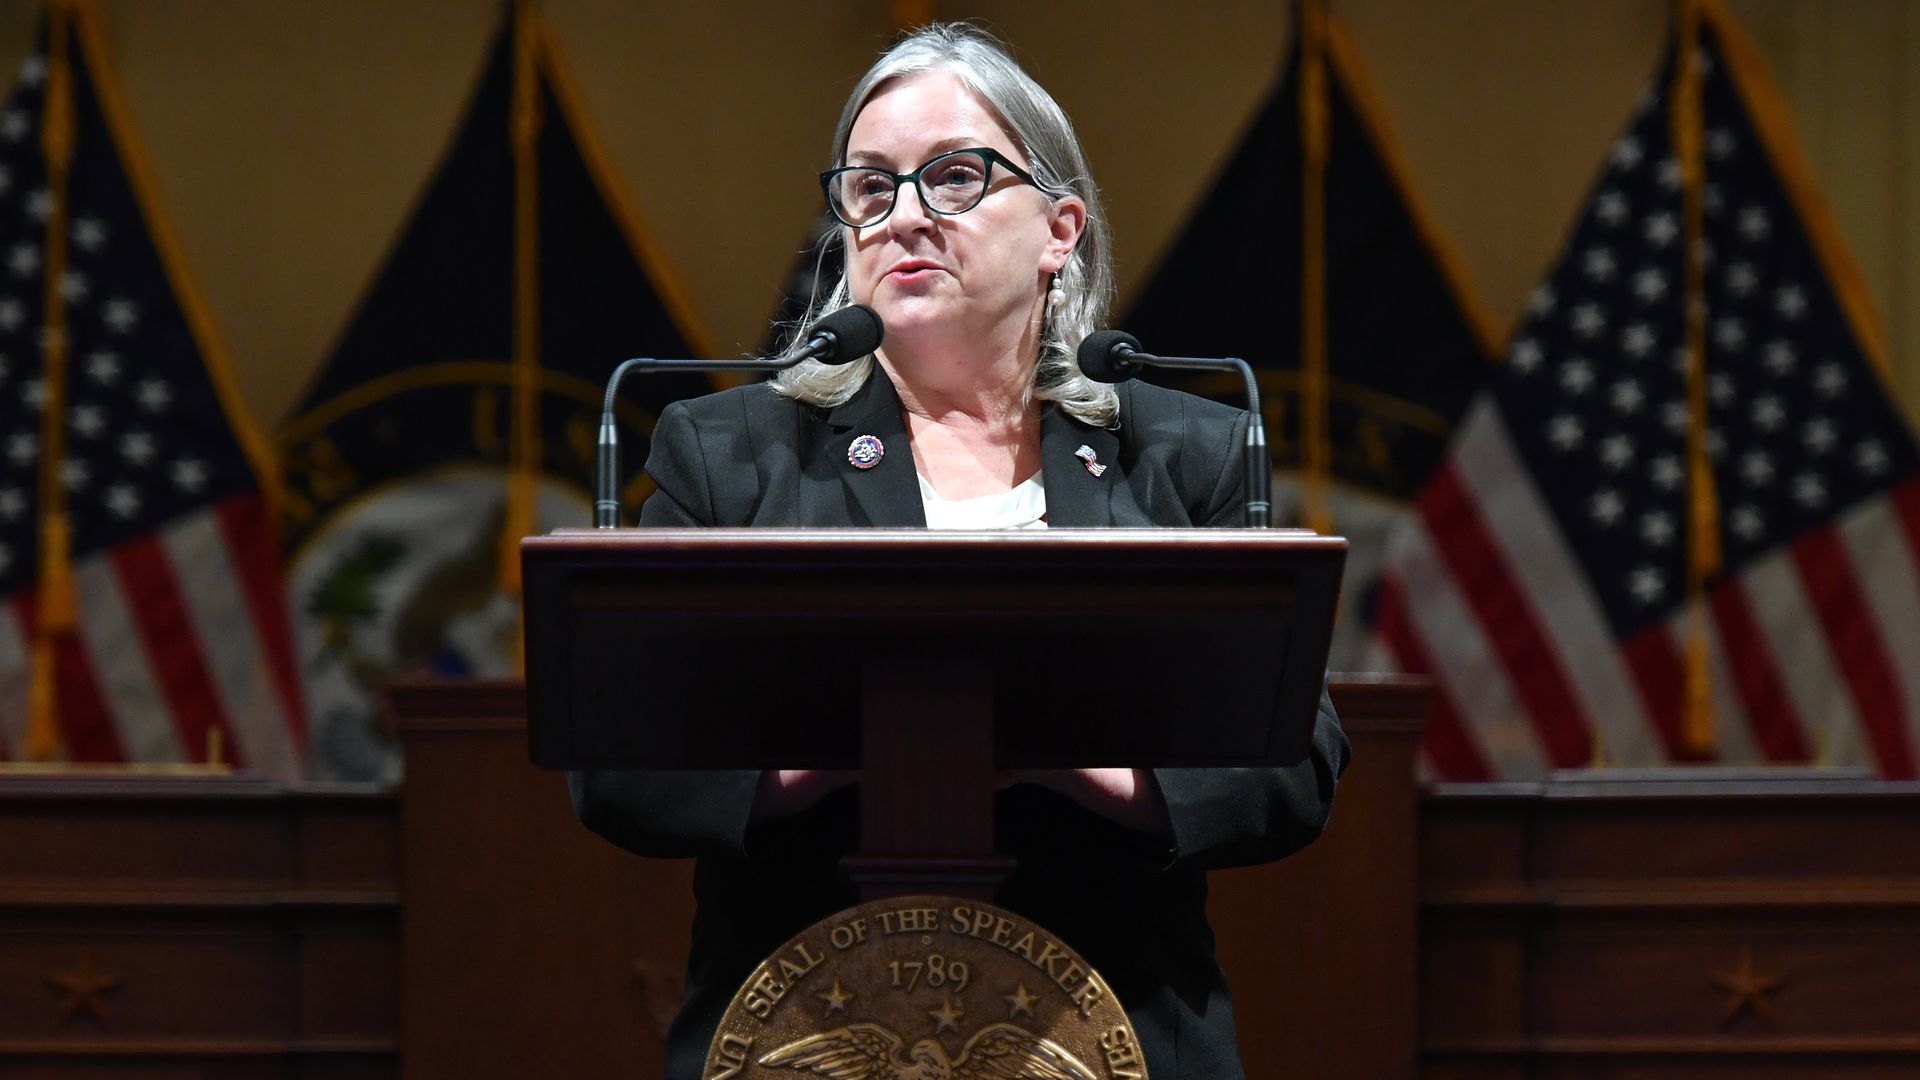 Rep. Susan Wild speaks at a podium wearing a gray suit, white shirt and glasses.